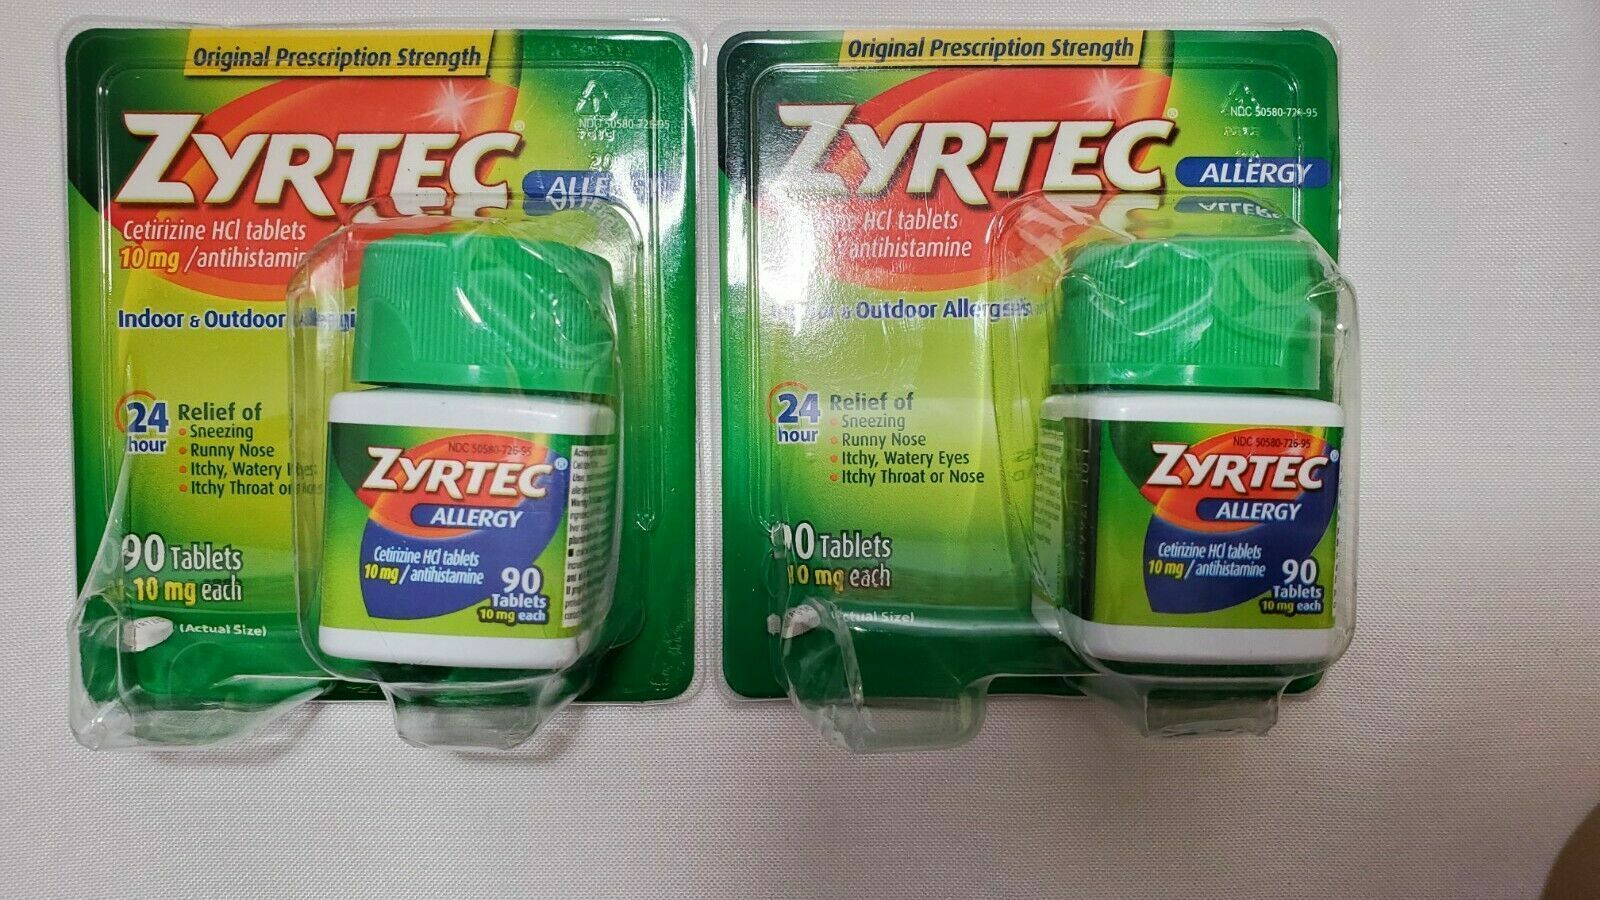 Zyrtec Allergy 24 Hour Relief 10mg, 90 ct, *LOT OF 2* - DAMAGED BOX Zyrtec MS-20690